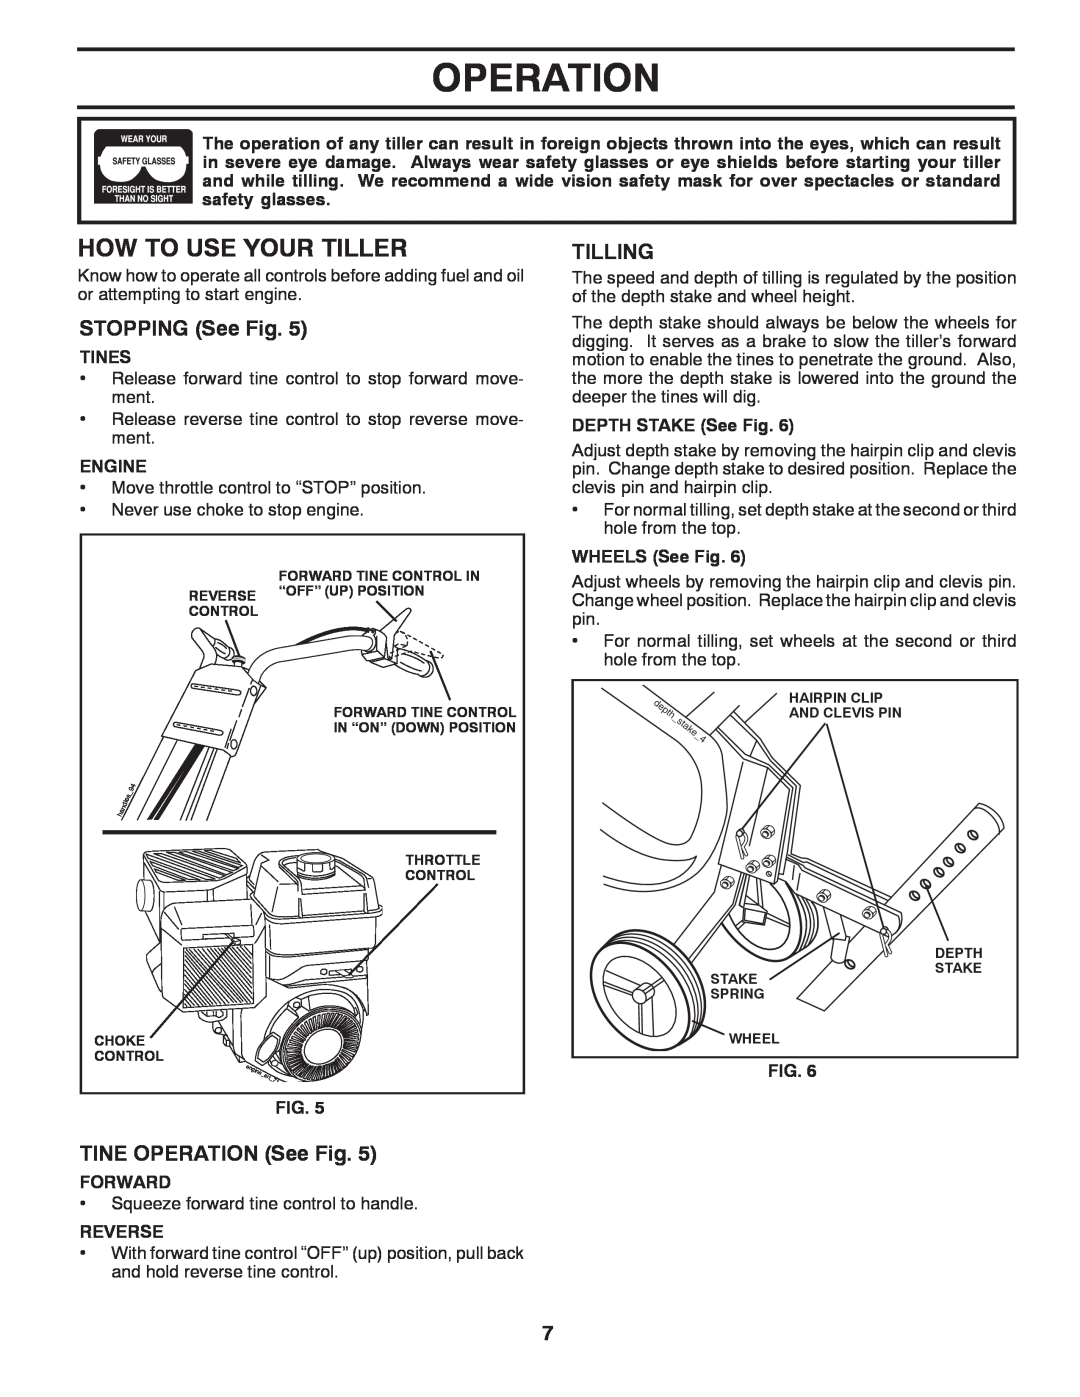 Poulan 413288 How To Use Your Tiller, STOPPING See Fig, TINE OPERATION See Fig, Tilling, Tines, Engine, Forward, Reverse 